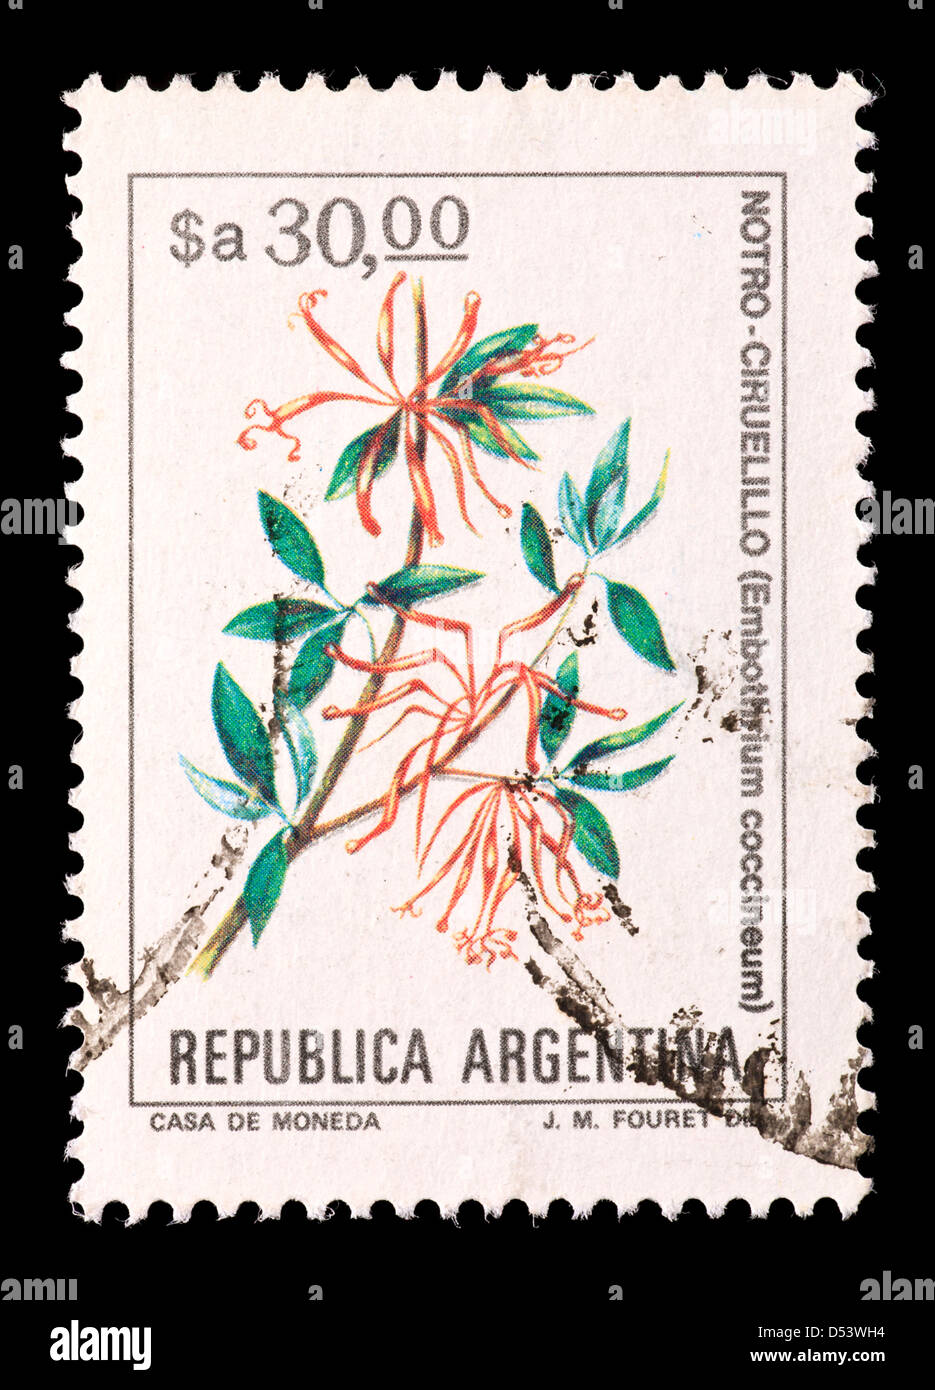 Postage stamp from Argentina depicting Chilean firetree or Chilean firebush flowers (Embottirium coccineum) Stock Photo